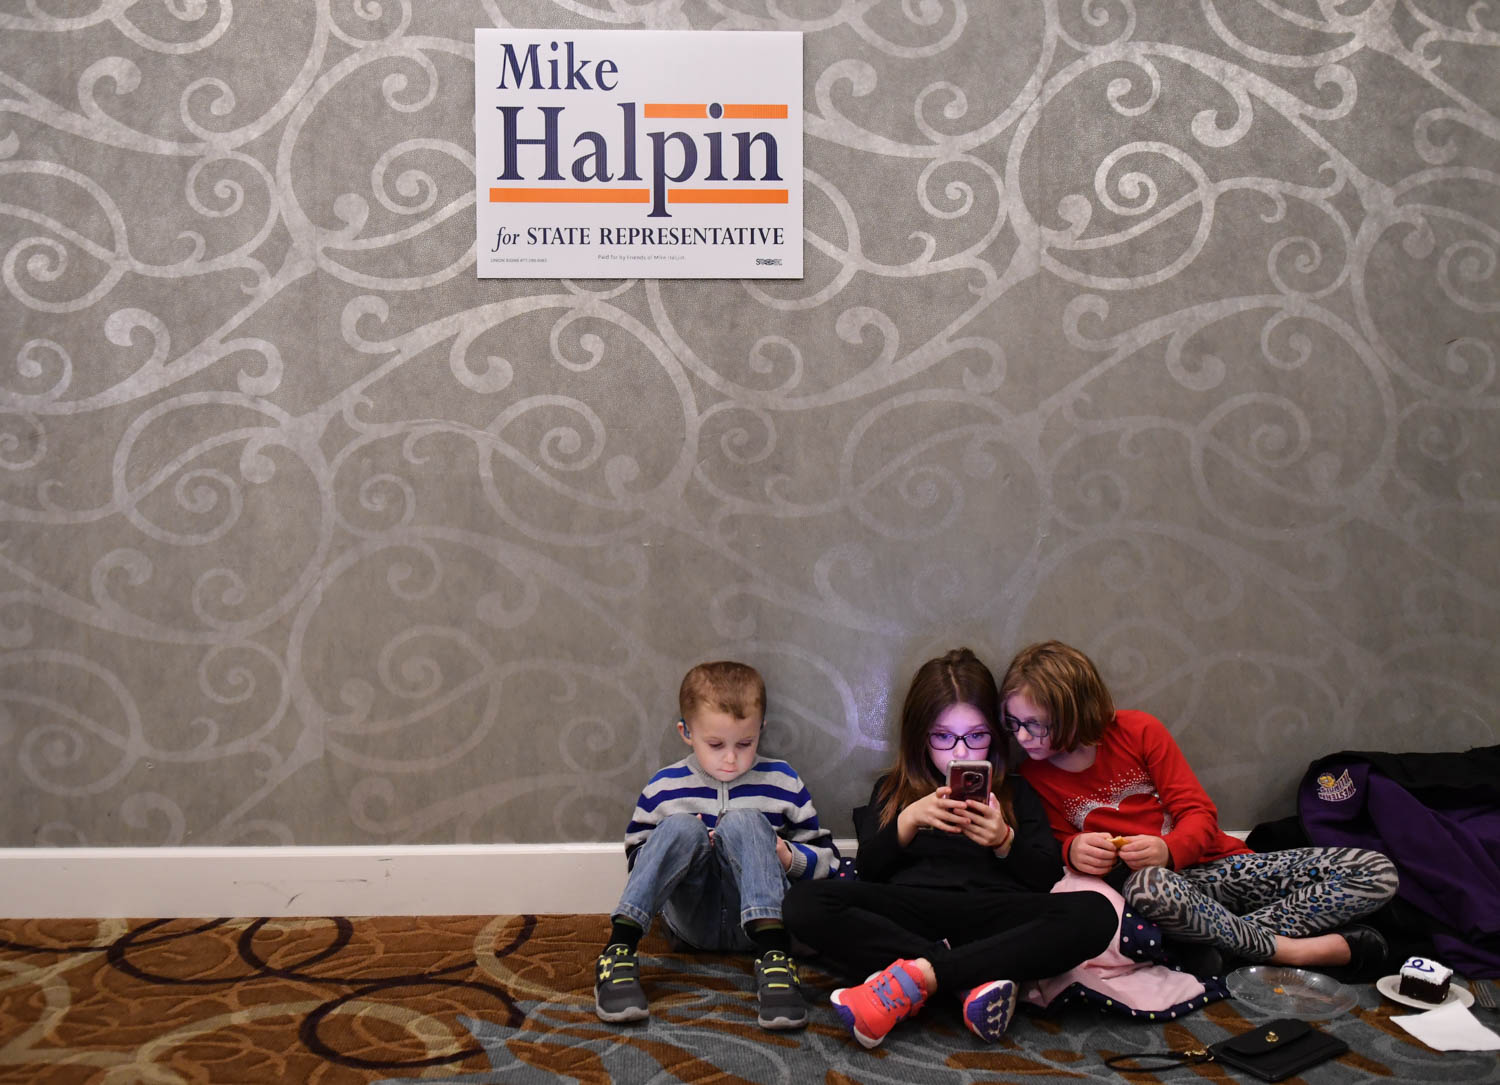 Kaysen Stokes, 4, Kenlie Stokes, 7 and  Kylar Elliott, 7, pass the time by playing games on their devices during the Rock Island County Democrats' election night party, at the Holiday Inn Rock Island, Tuesday Nov. 5, 2018.  (Todd Mizener - Dispatch/Argus) 